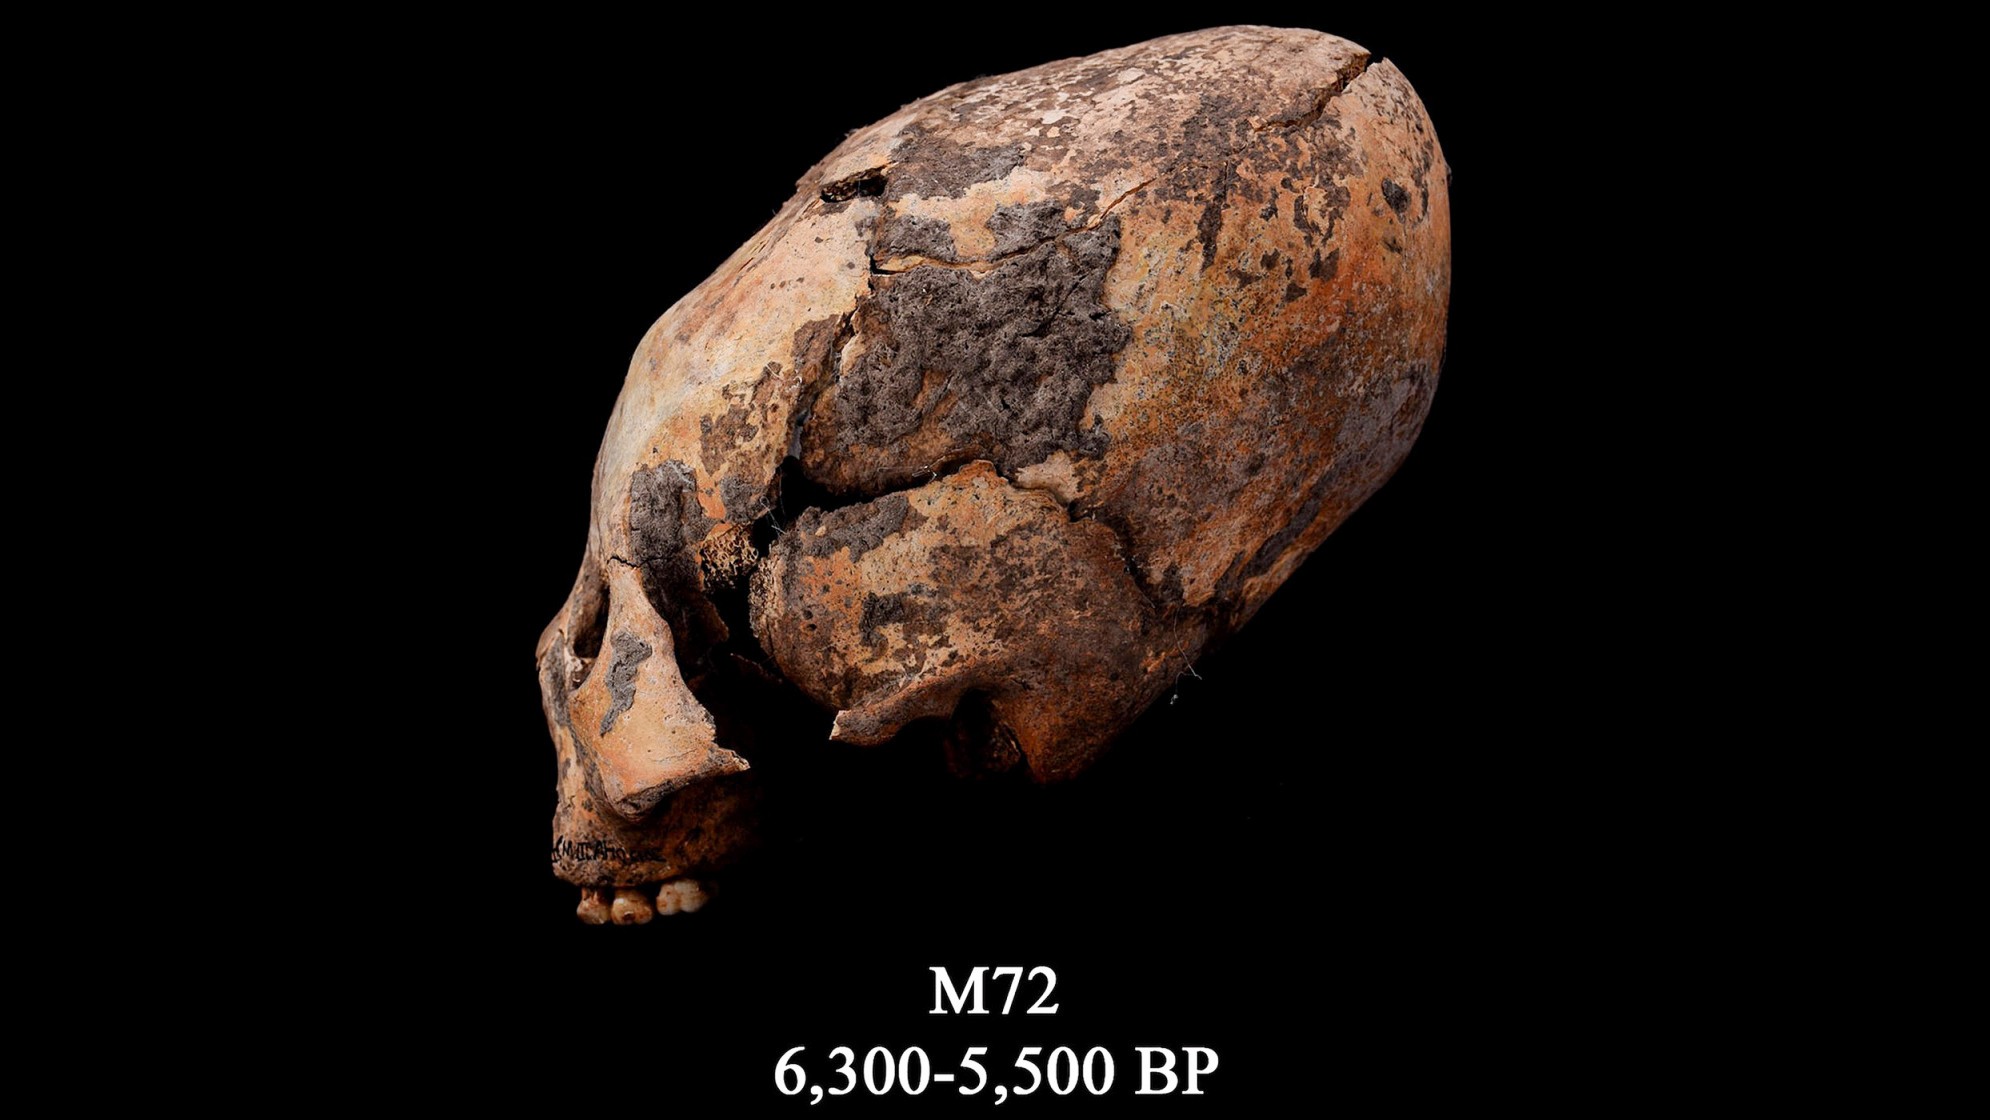 The skull known as M72. This reshaped human skull was found in northeastern China, and was intentionally modified